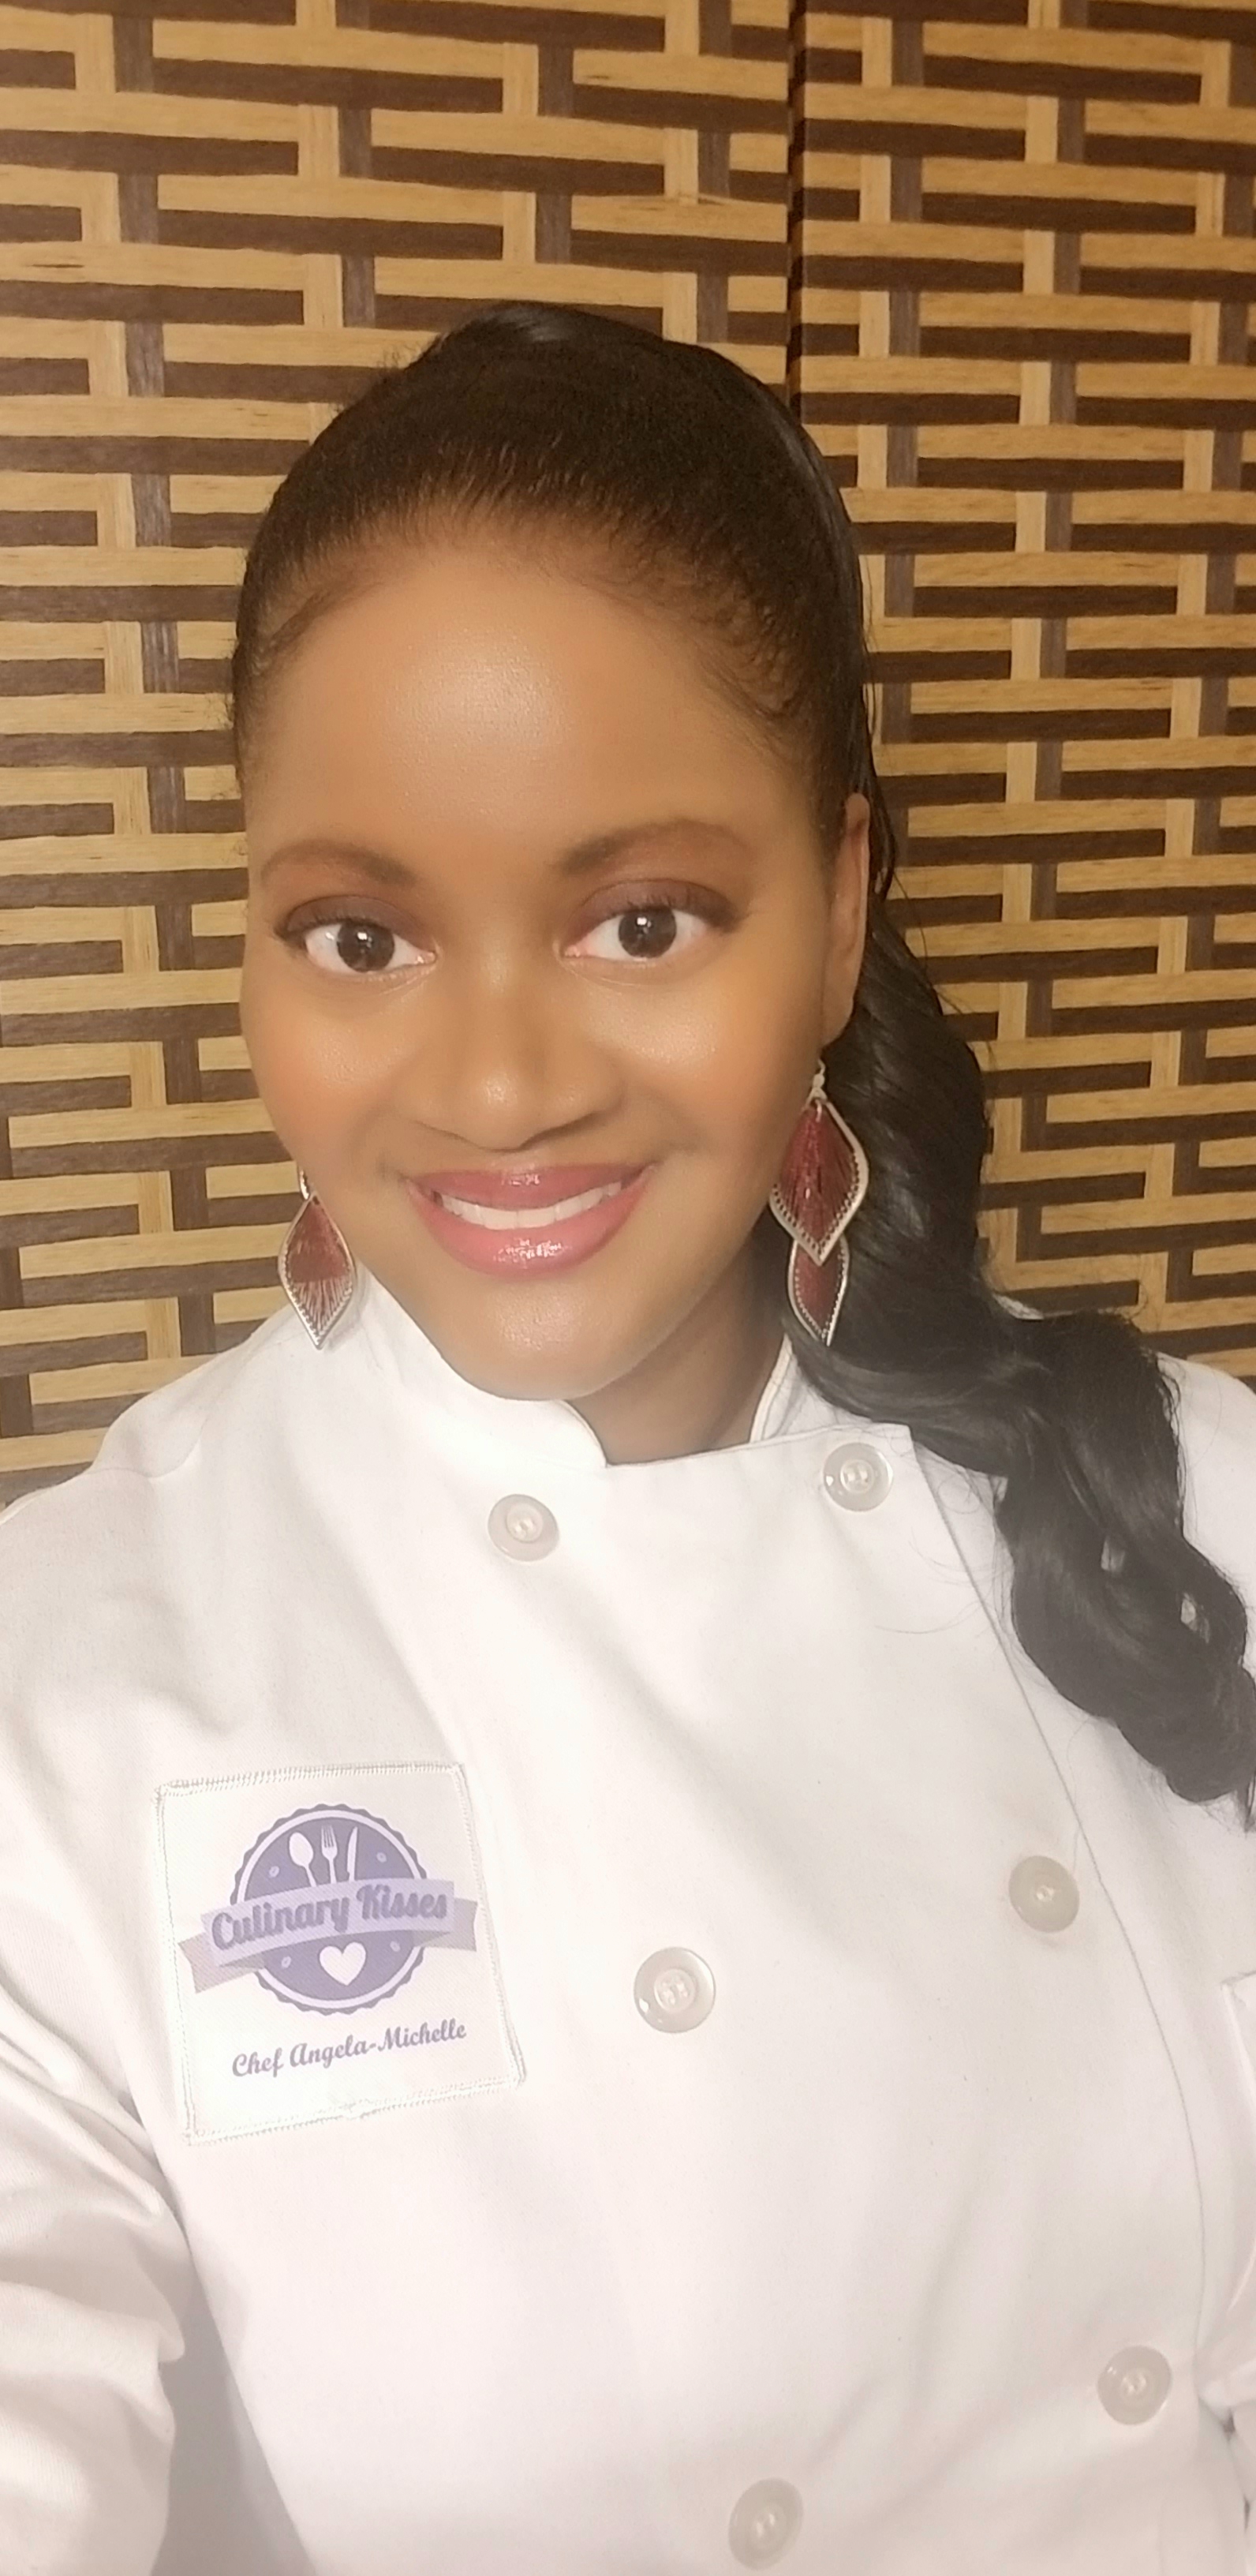 Chef Angela-Michelle, Owner/CEO